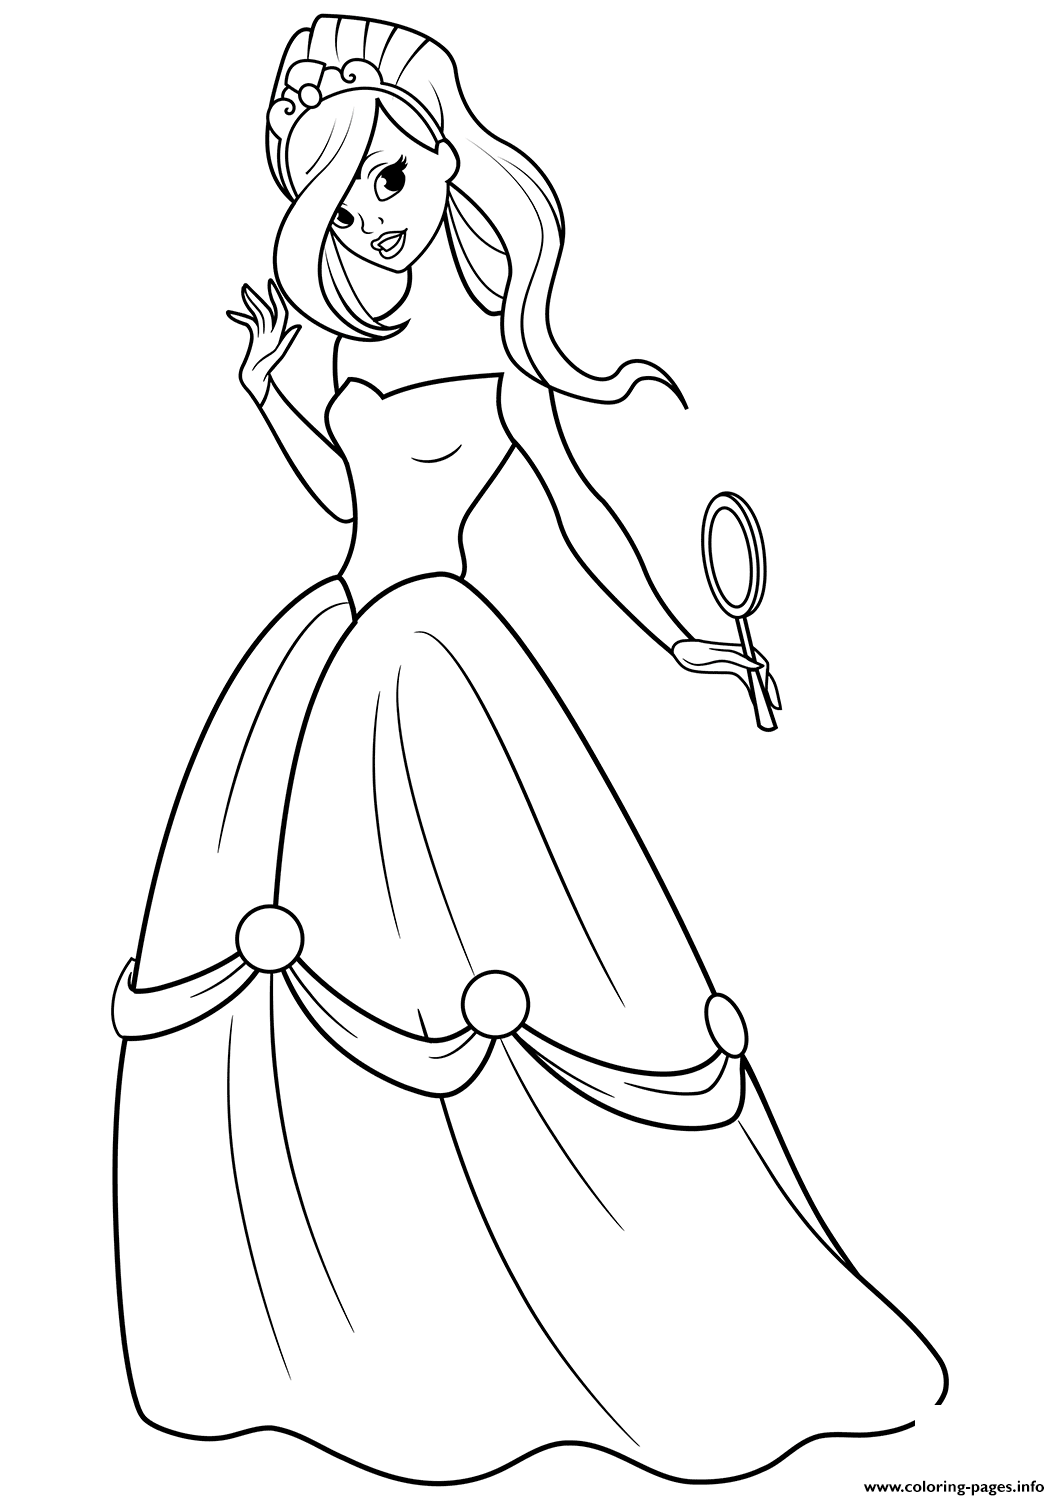 Beautiful Princess With Mirror In Her Hand Coloring Pages Printable